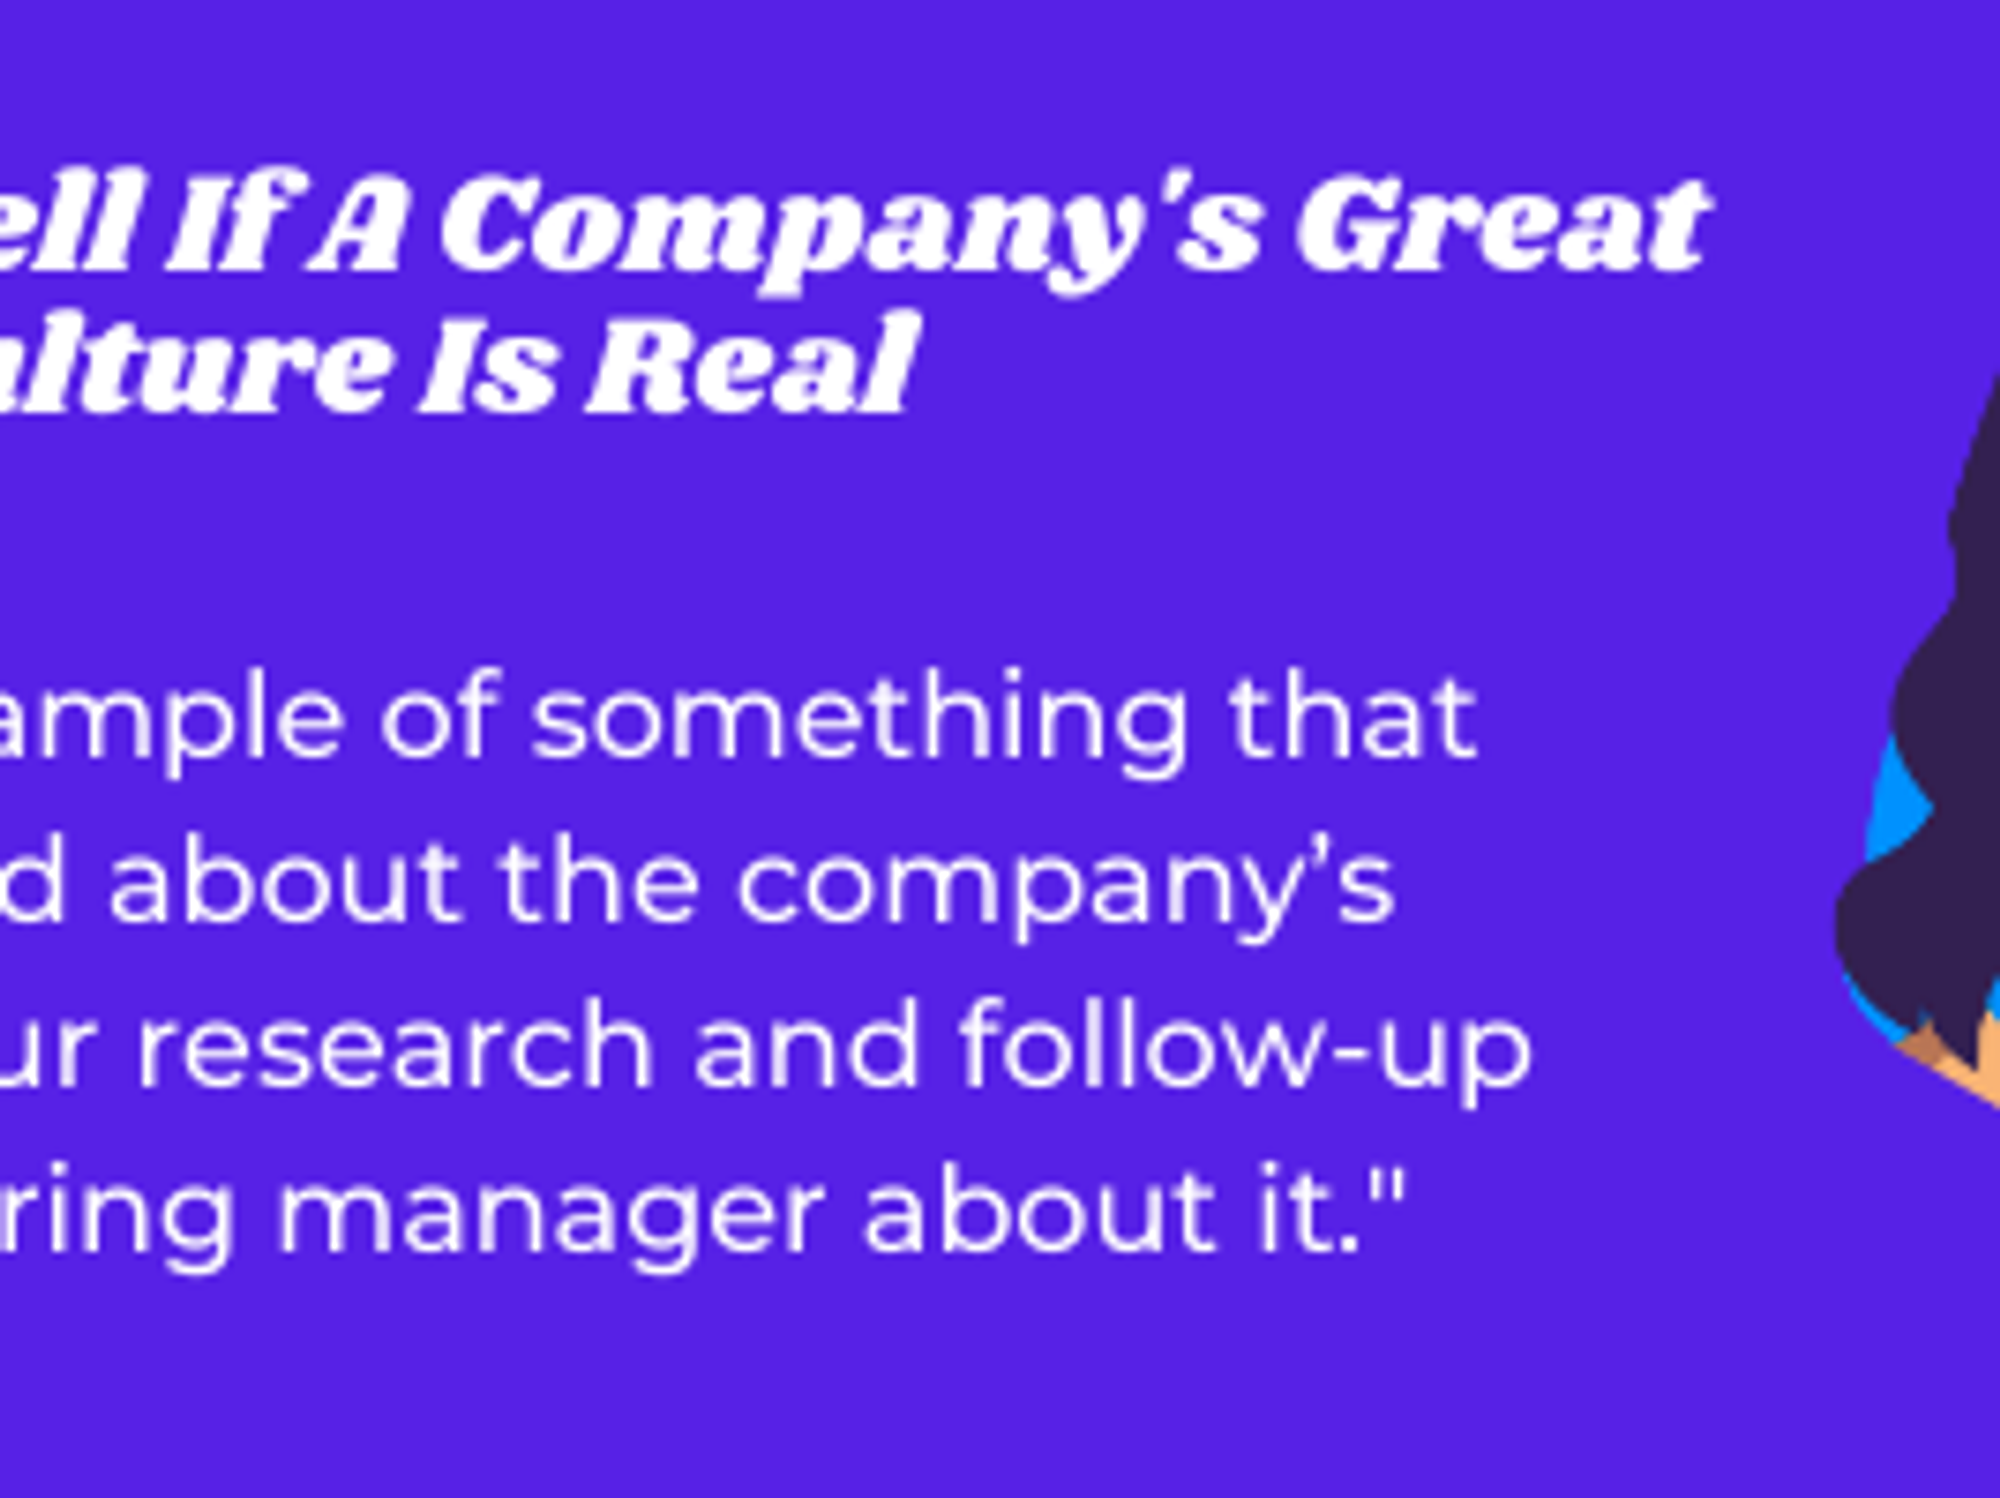 It's important to research and follow-up about what companies say about their culture.